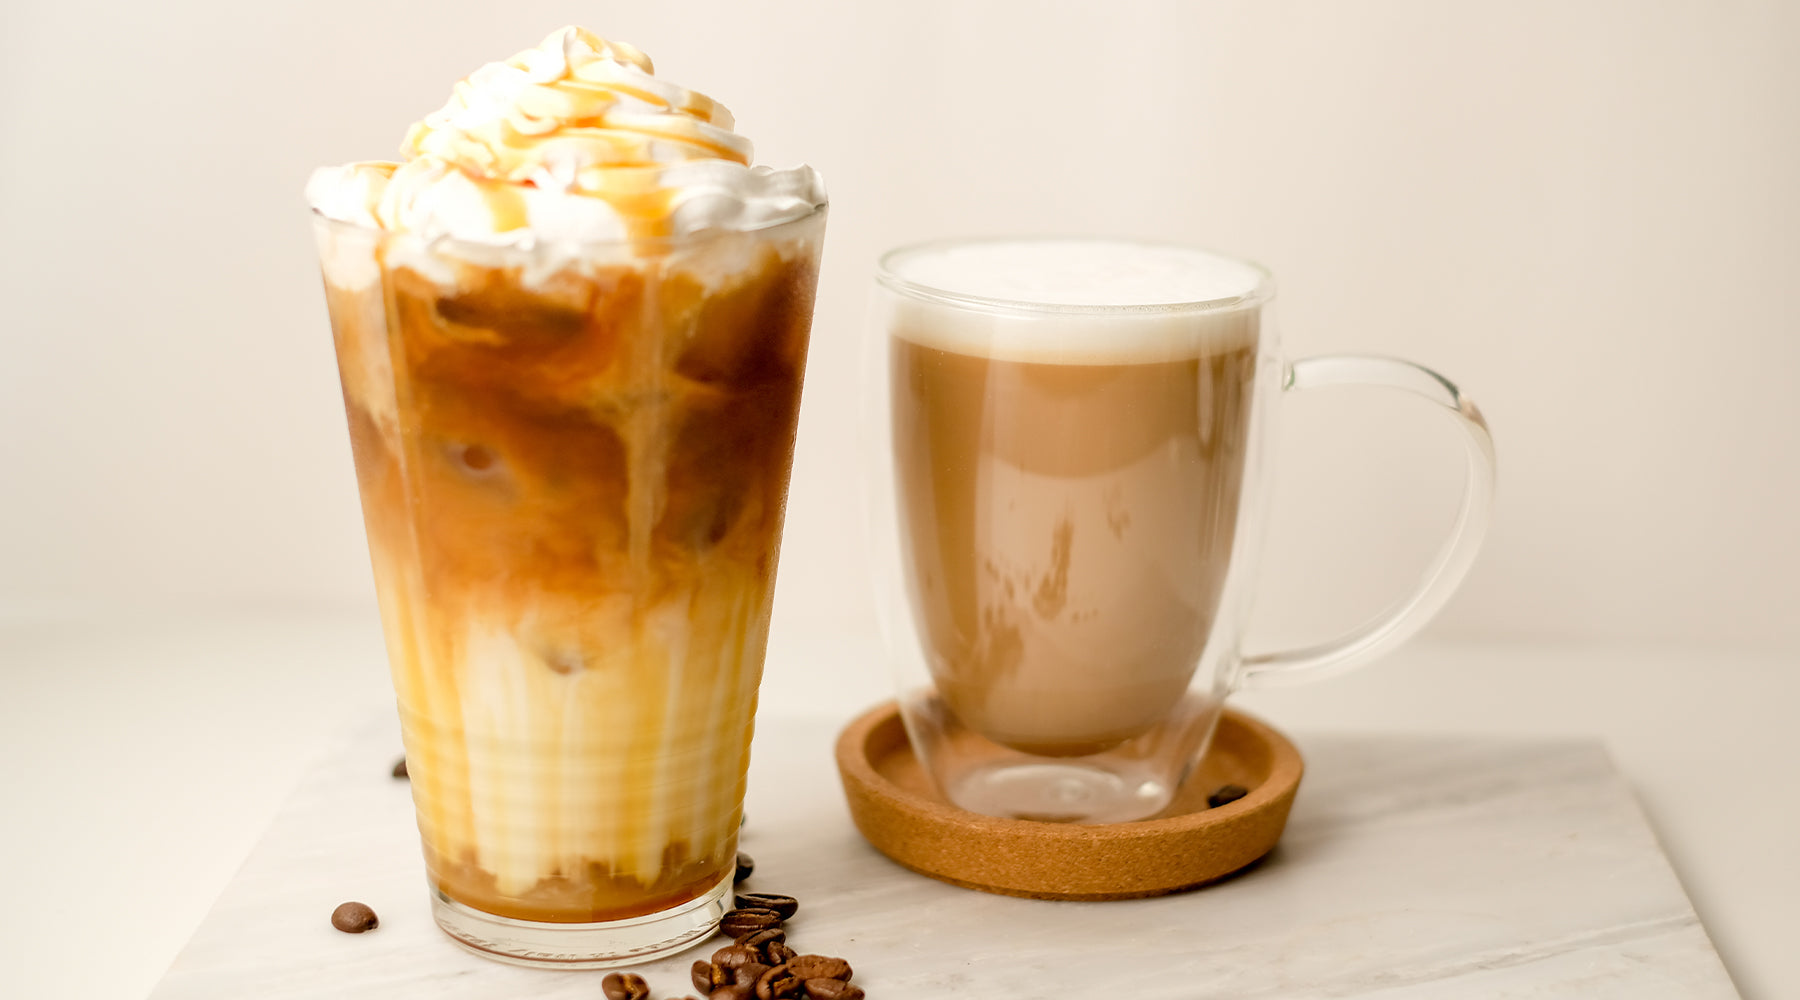 Hot Coffee or Cold Brew - which provides more health Benefits?